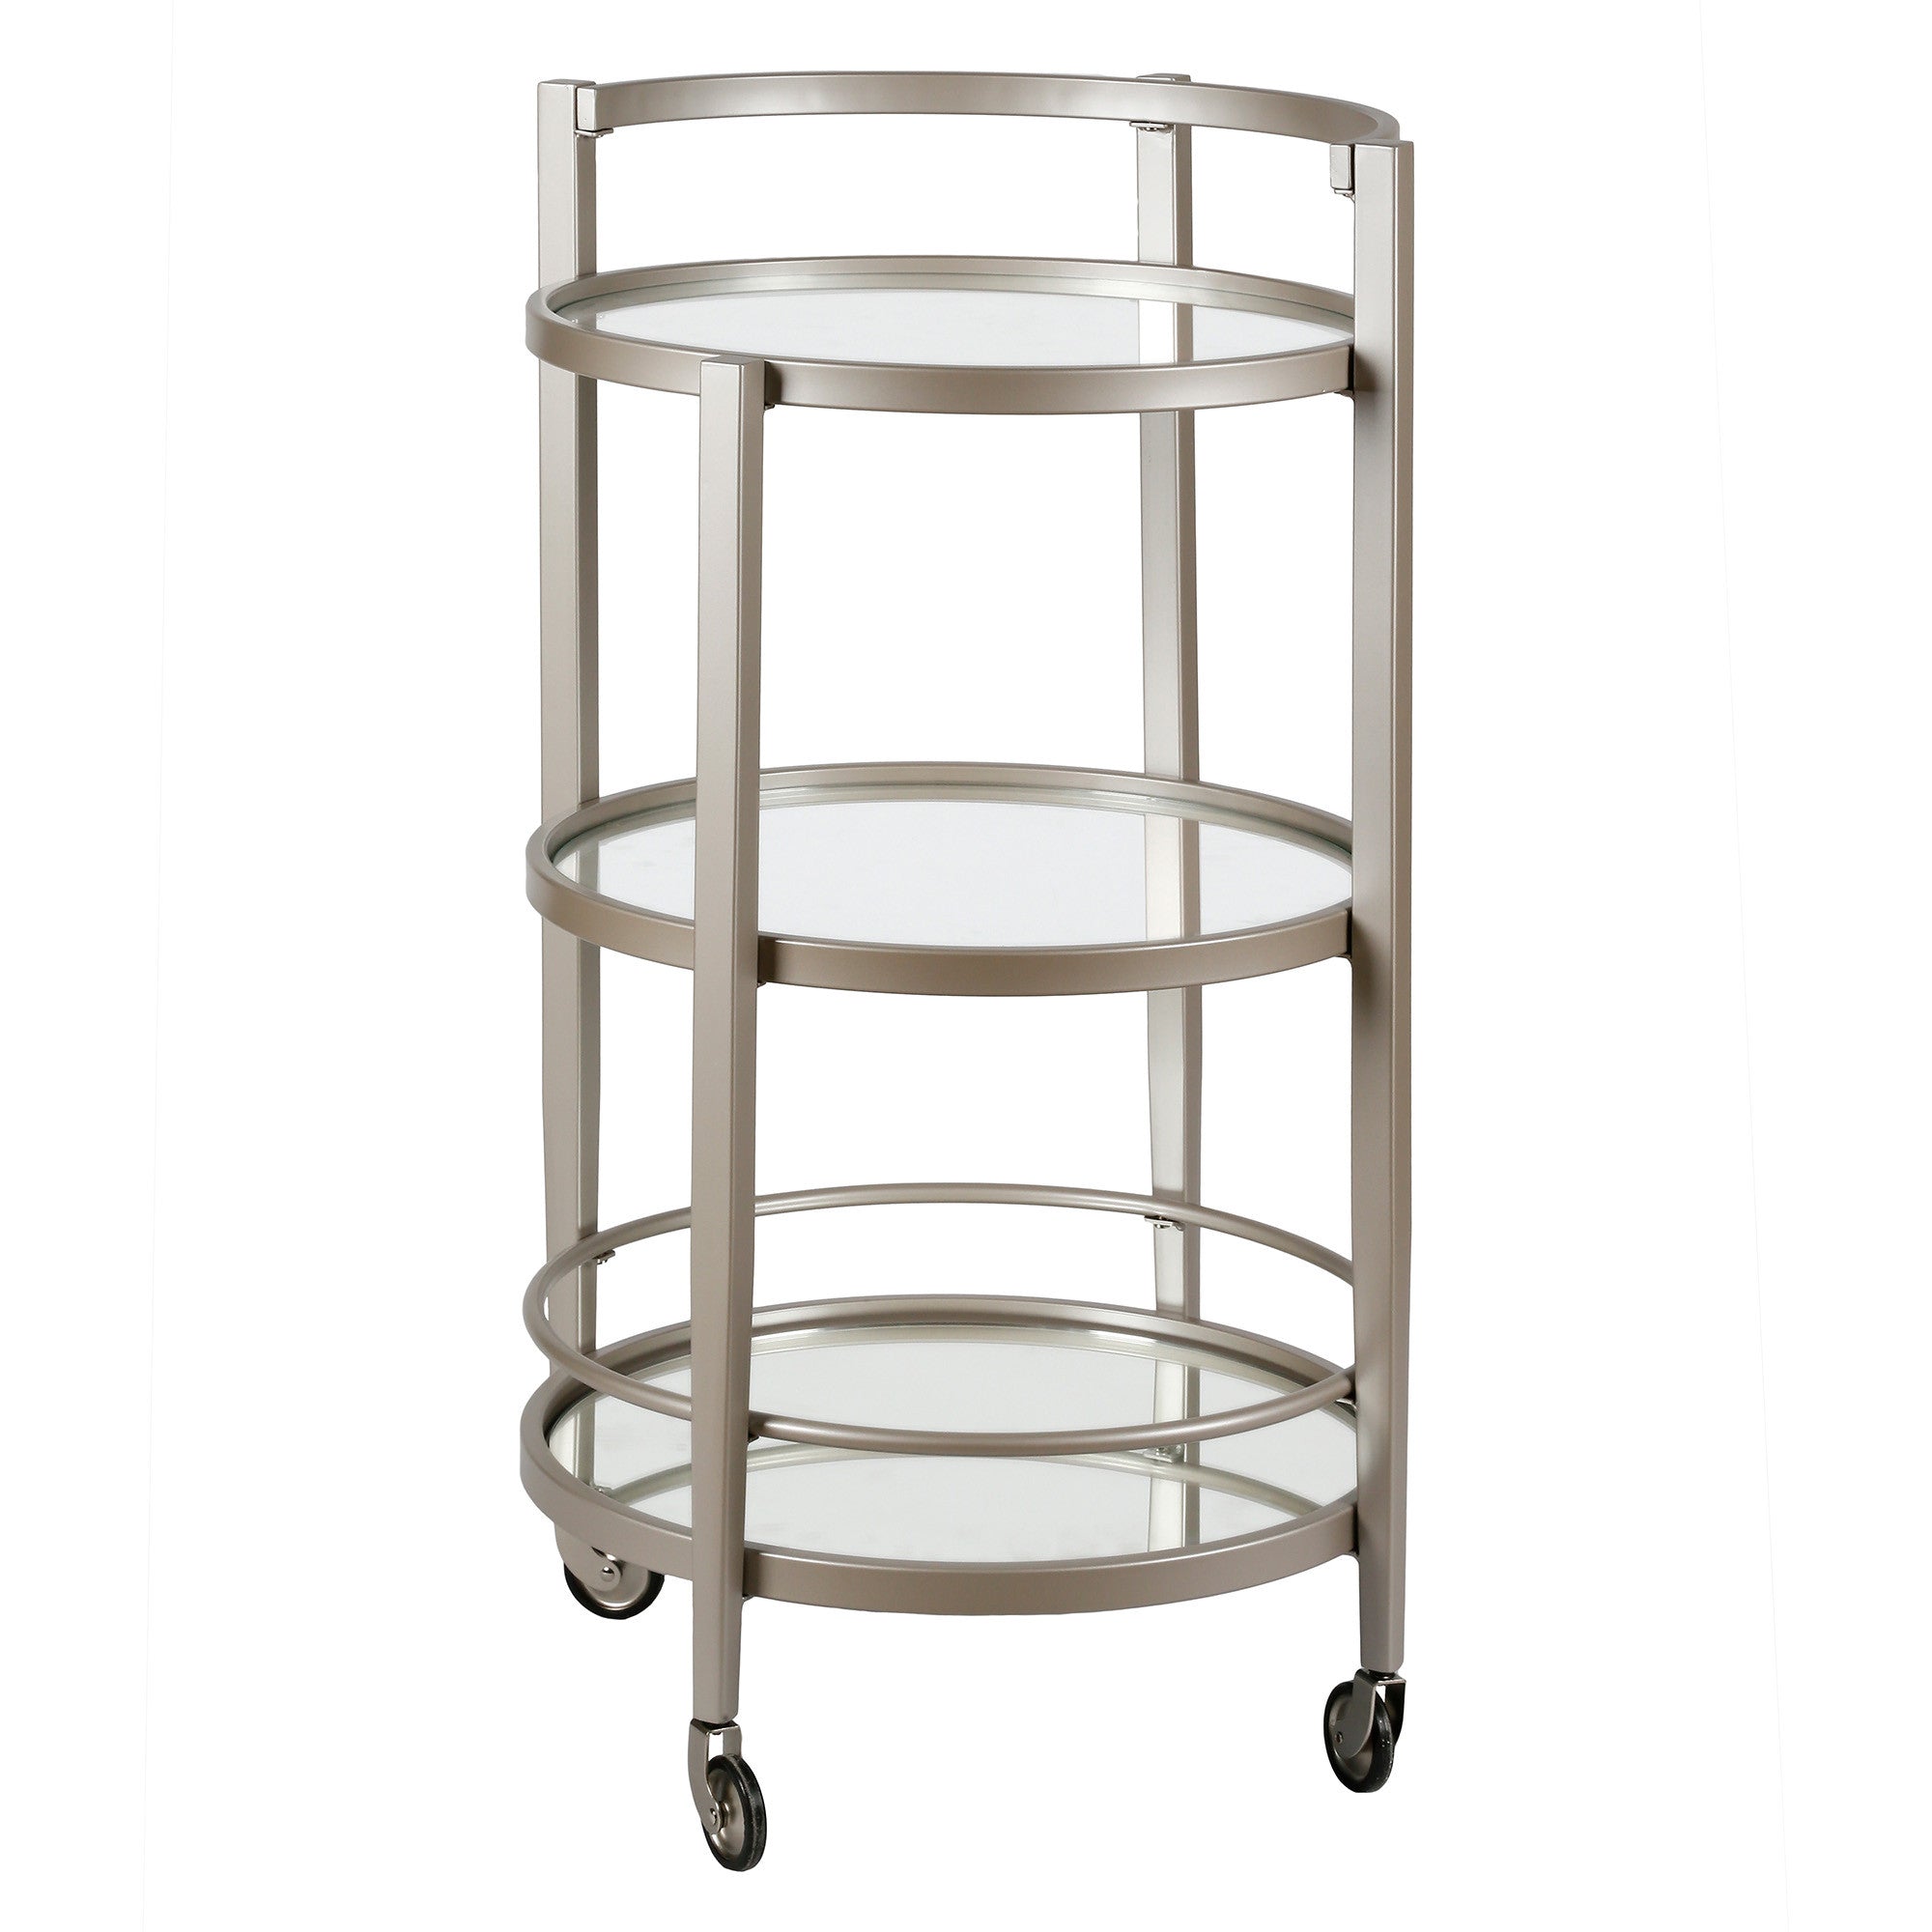 Nickel Steel And Glass Round Rolling Bar Cart